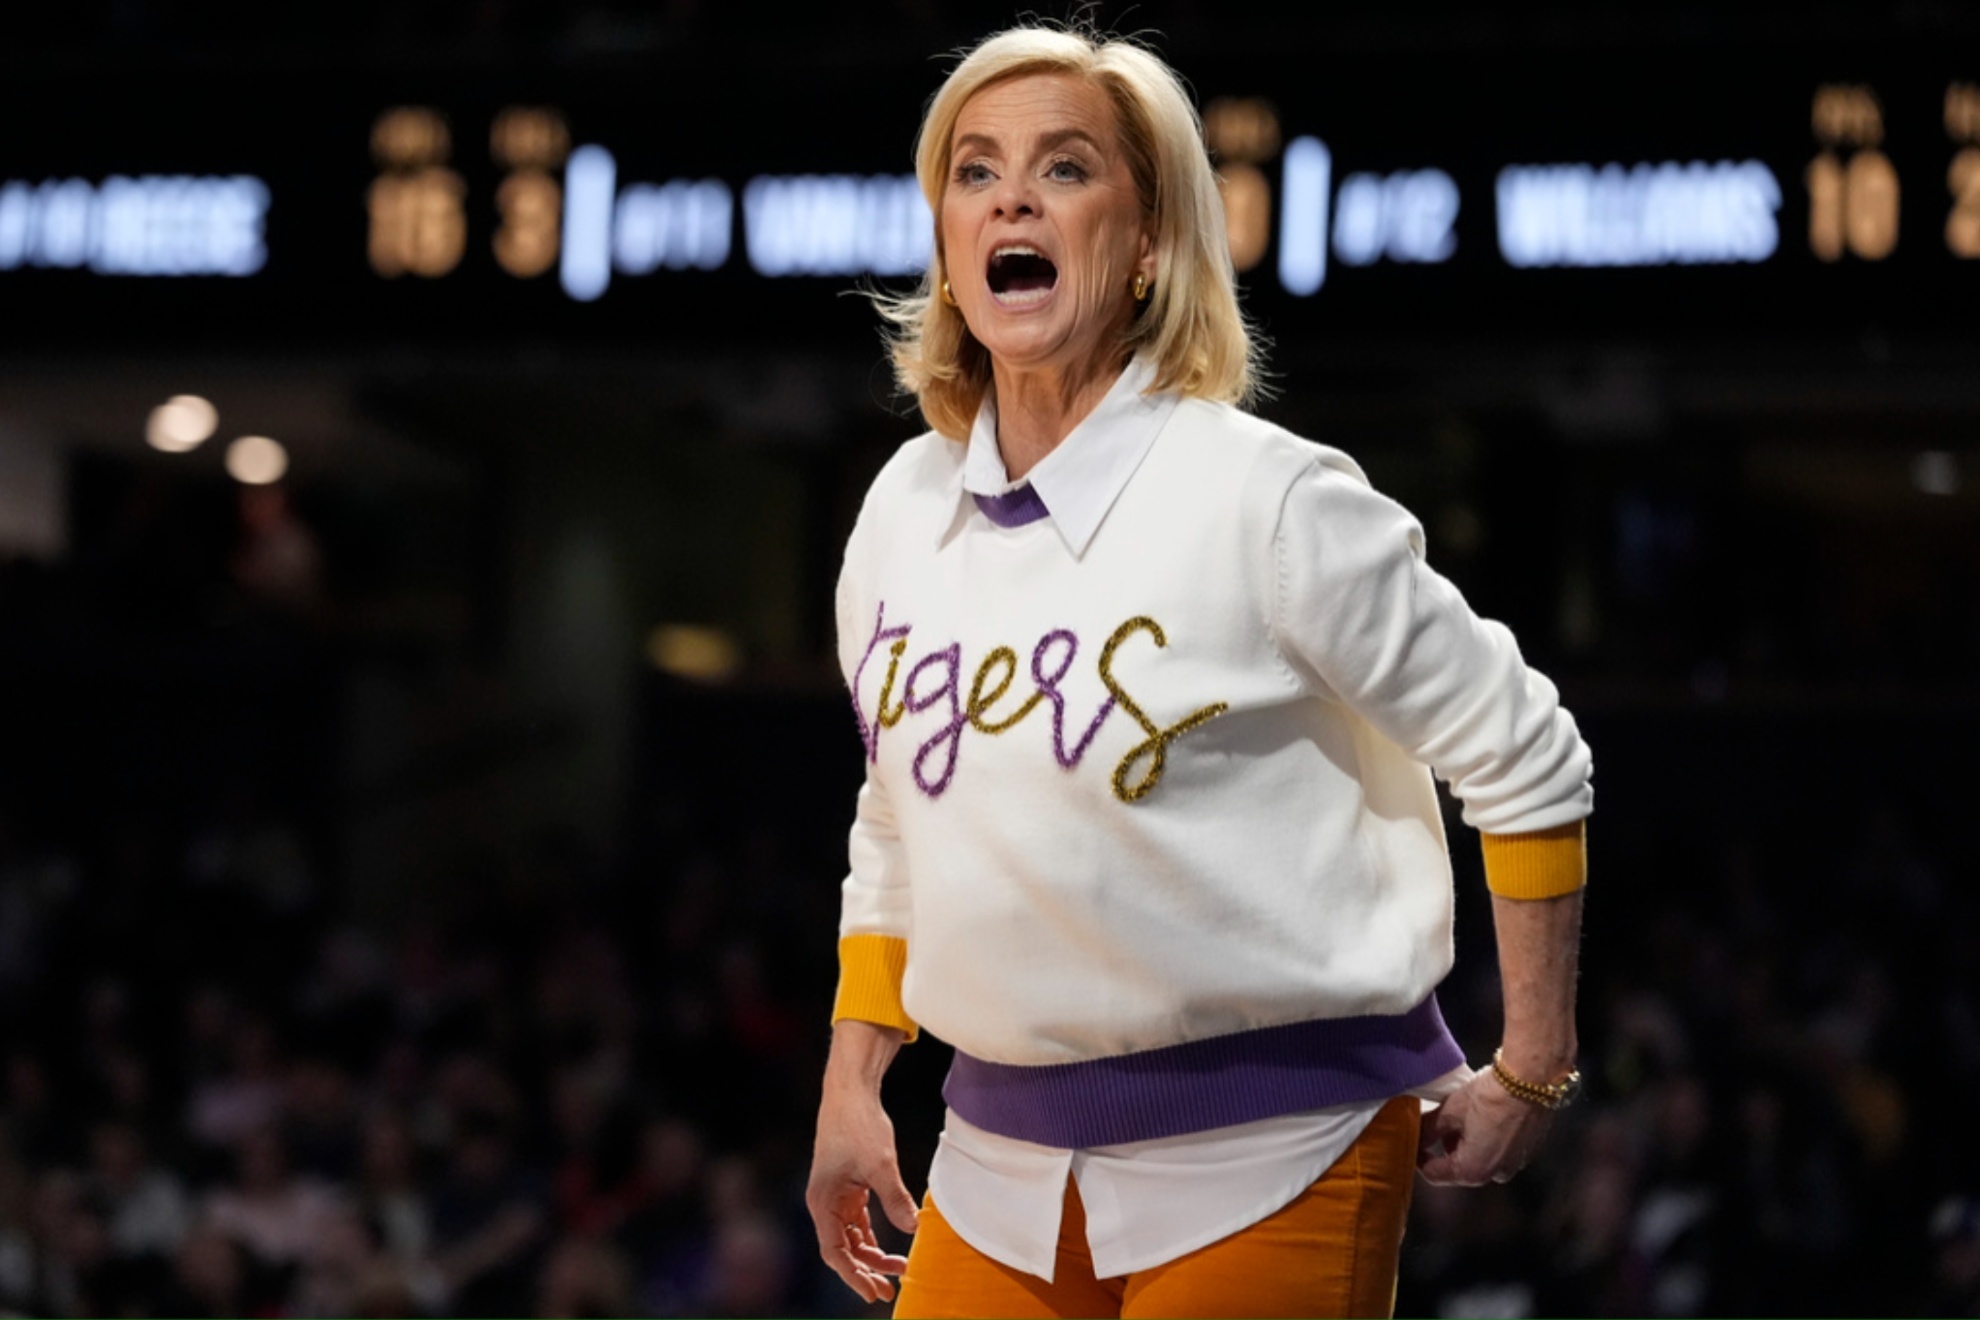 Kim Mulkey is the controversial coach of the LSU Womens basketball team